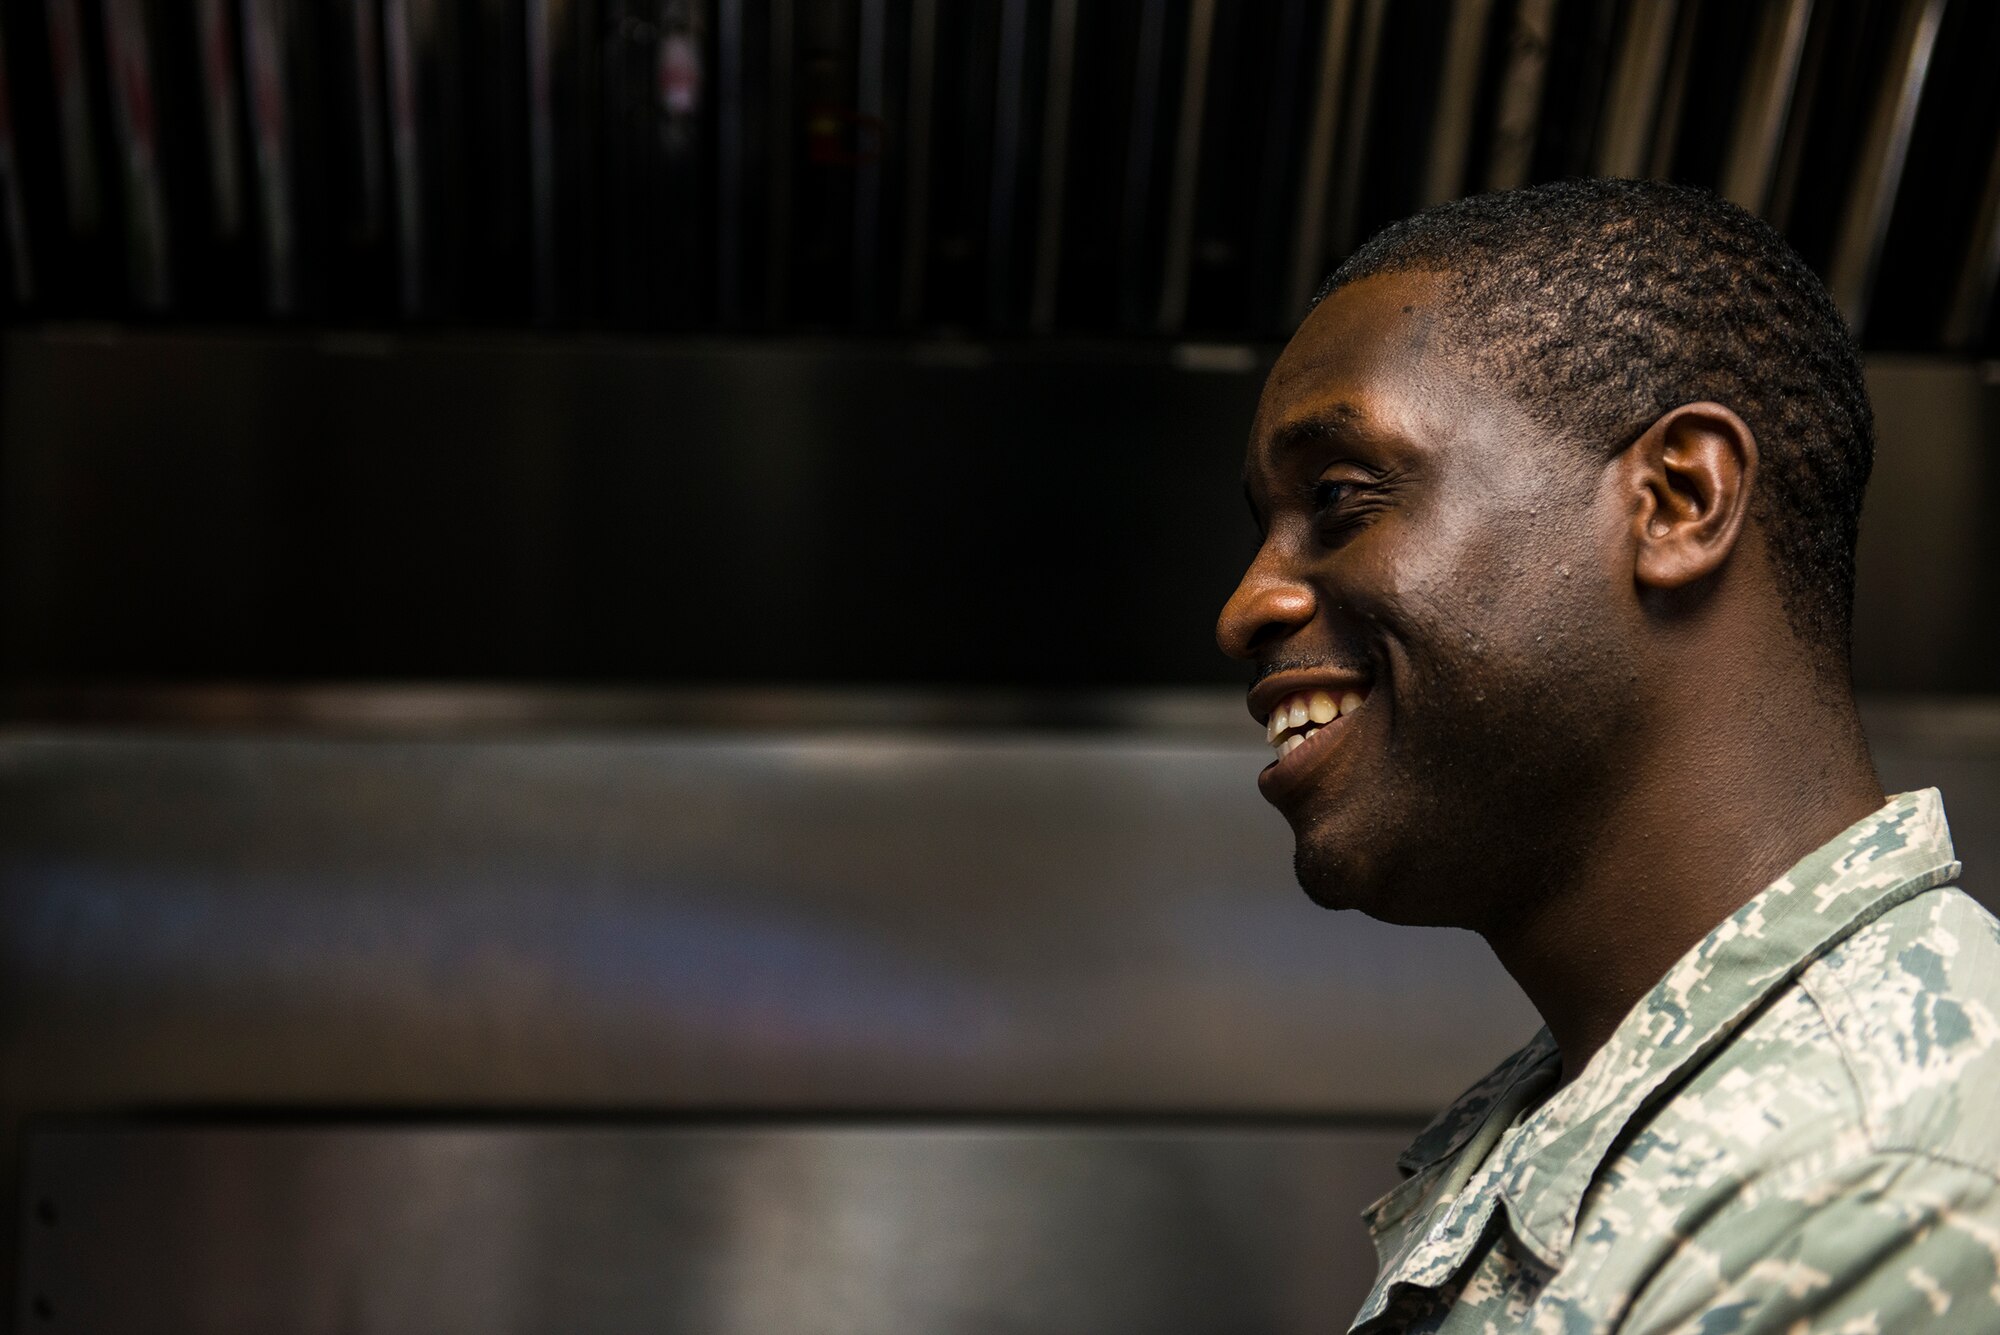 Staff Sgt. Phillip Burns II stops for a chat in front of a stove July 17, 2014, on Moody Air Force Base, Ga. Burns is a 23d Civil Engineer Squadron fire inspector and cooks at least four times per week for himself or anyone who asks. (U.S. Air Force photo/Airman 1st Class Ryan Callaghan)
